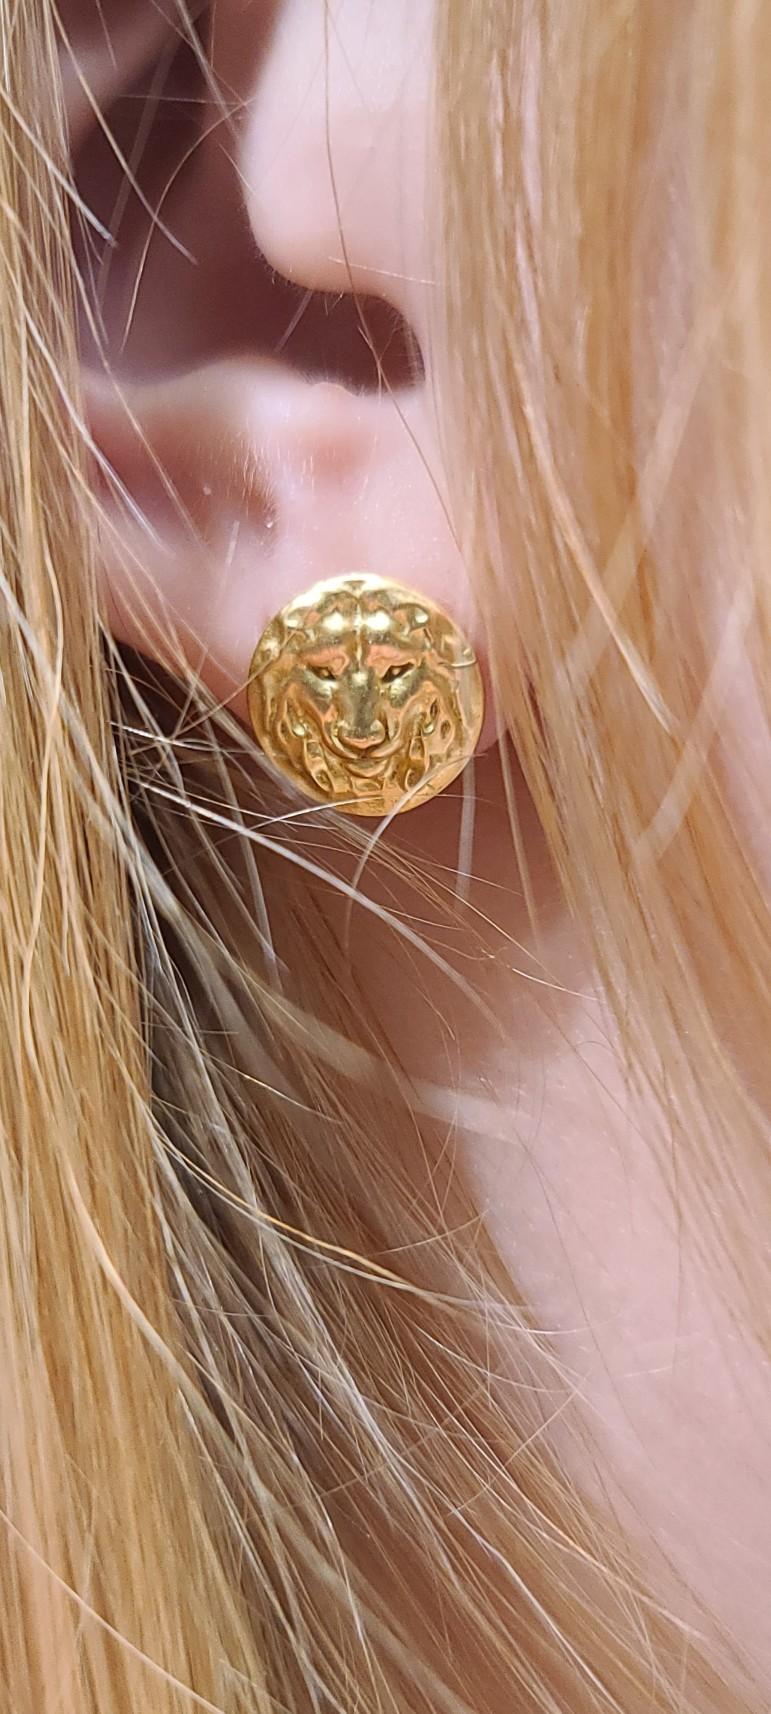 18K Yellow Gold Lion Pierced Earrings, The king of the jungle made especially for the ears now! Absolutely fearless.  Can you hear the roar?  Matte finished or polished , your choice.  12 mm diameter. Made to order in NYC , please allow  3-4